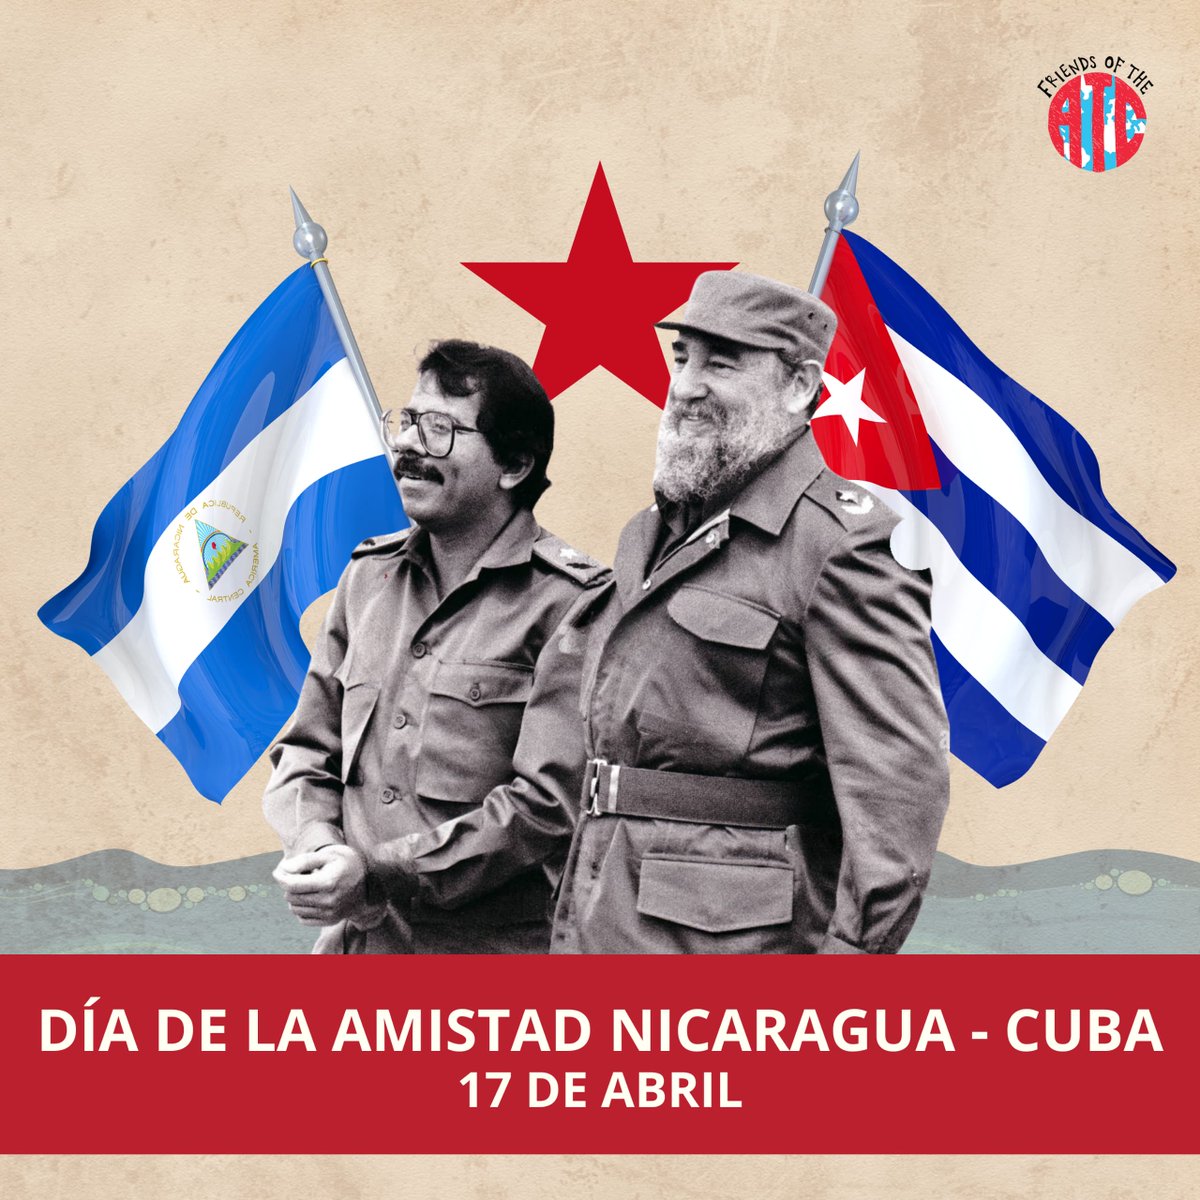 🇳🇮🇨🇺 Nicaragua - Cuba Friendship Day April 17th marks the day that Nicaraguan pilot Carlos Ulloa fell in combat in defense of the Cuban Revolution during the Playa Girón battle (Bay of Pigs invasion) #AbrilMesDeLaPaz #4519LaPatriaLaRevolución